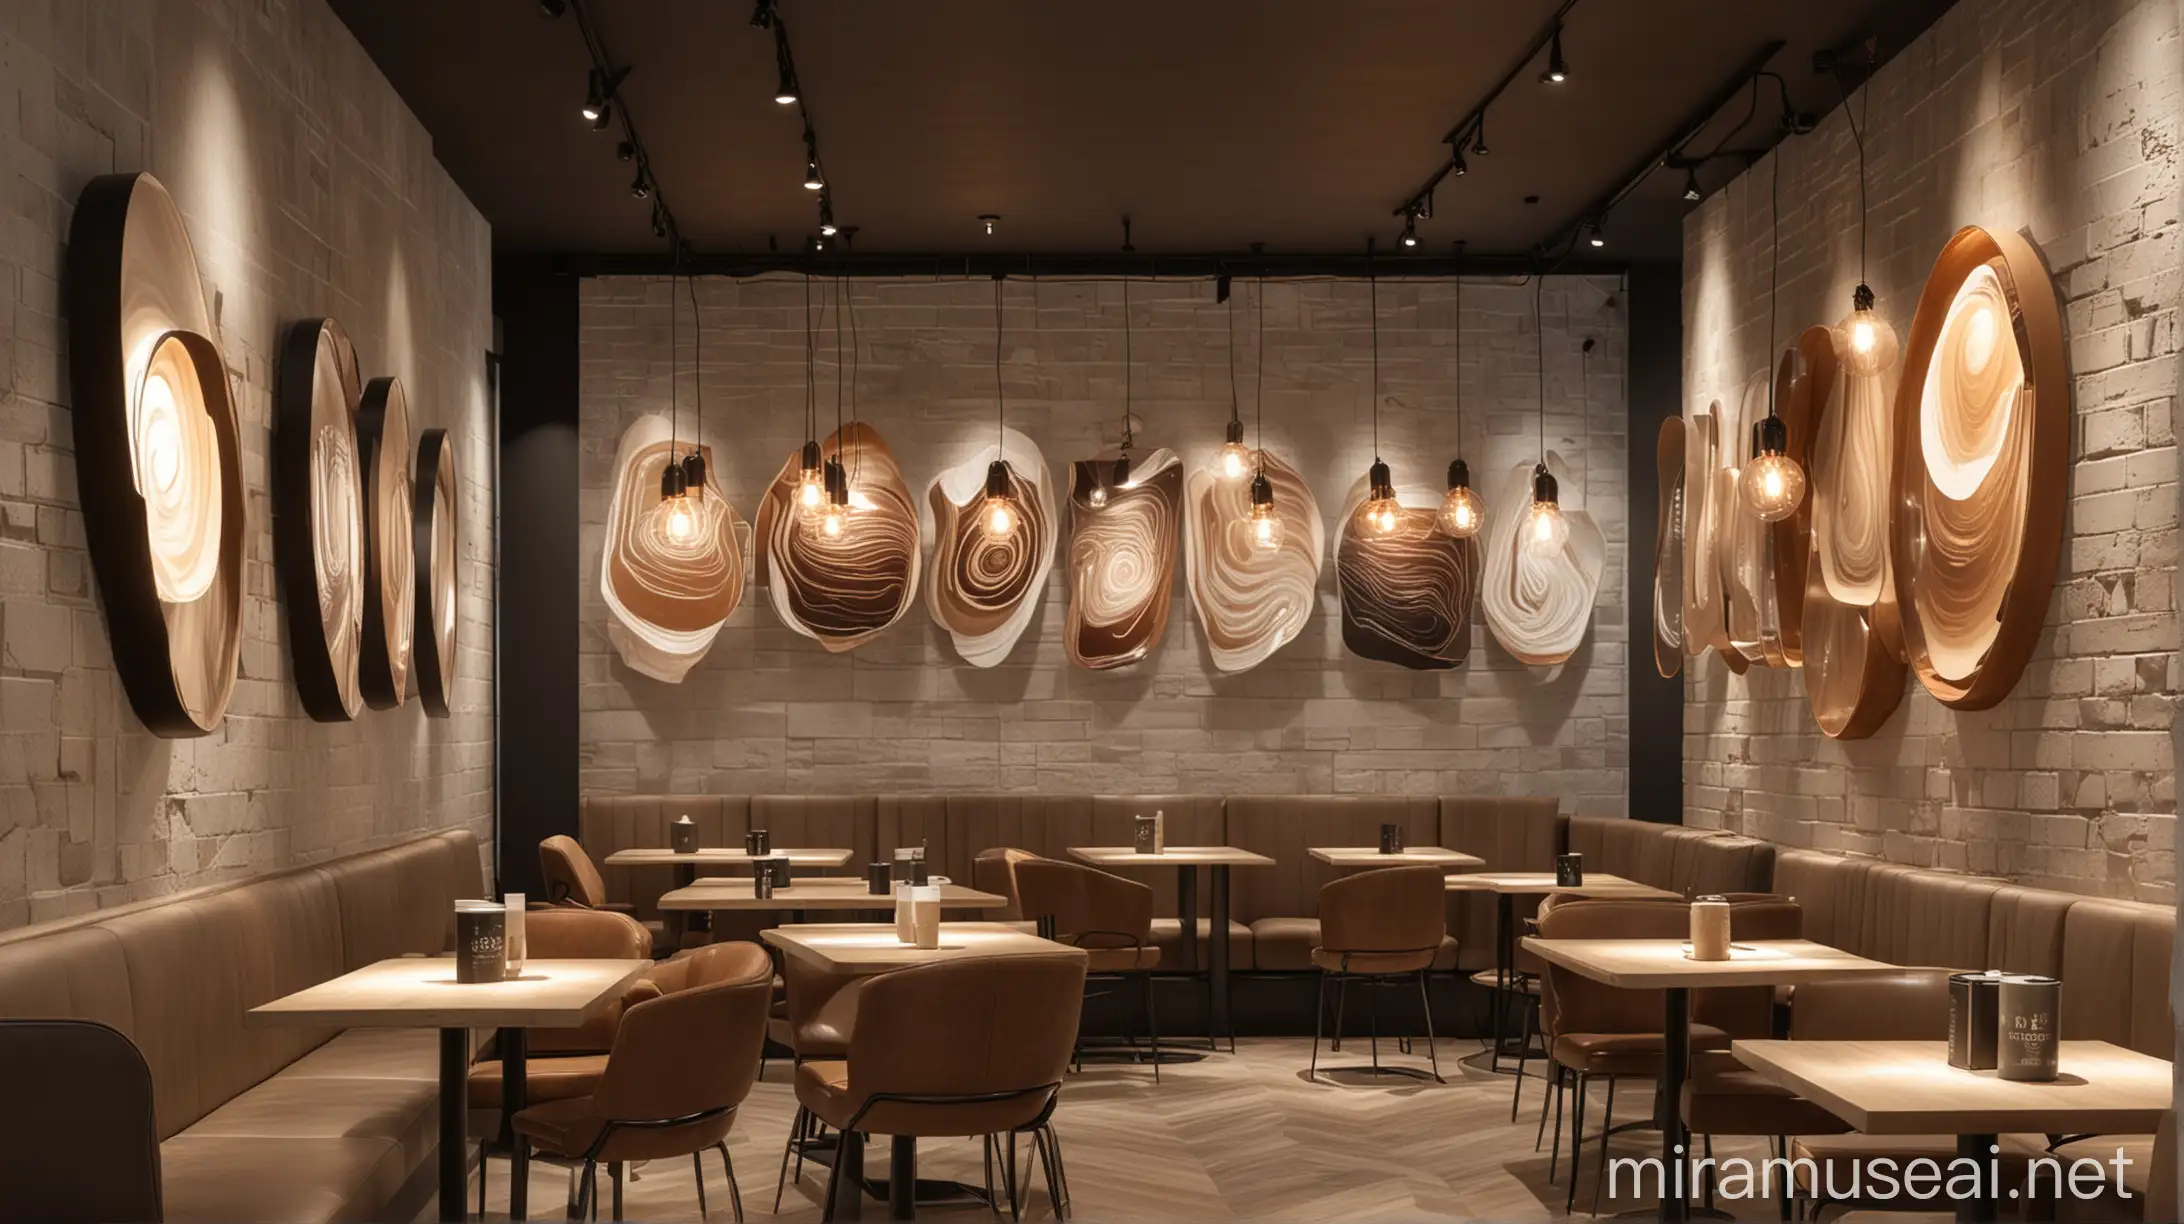 a coffee shop interior design neo modern indirect lighting and abstract wall decor